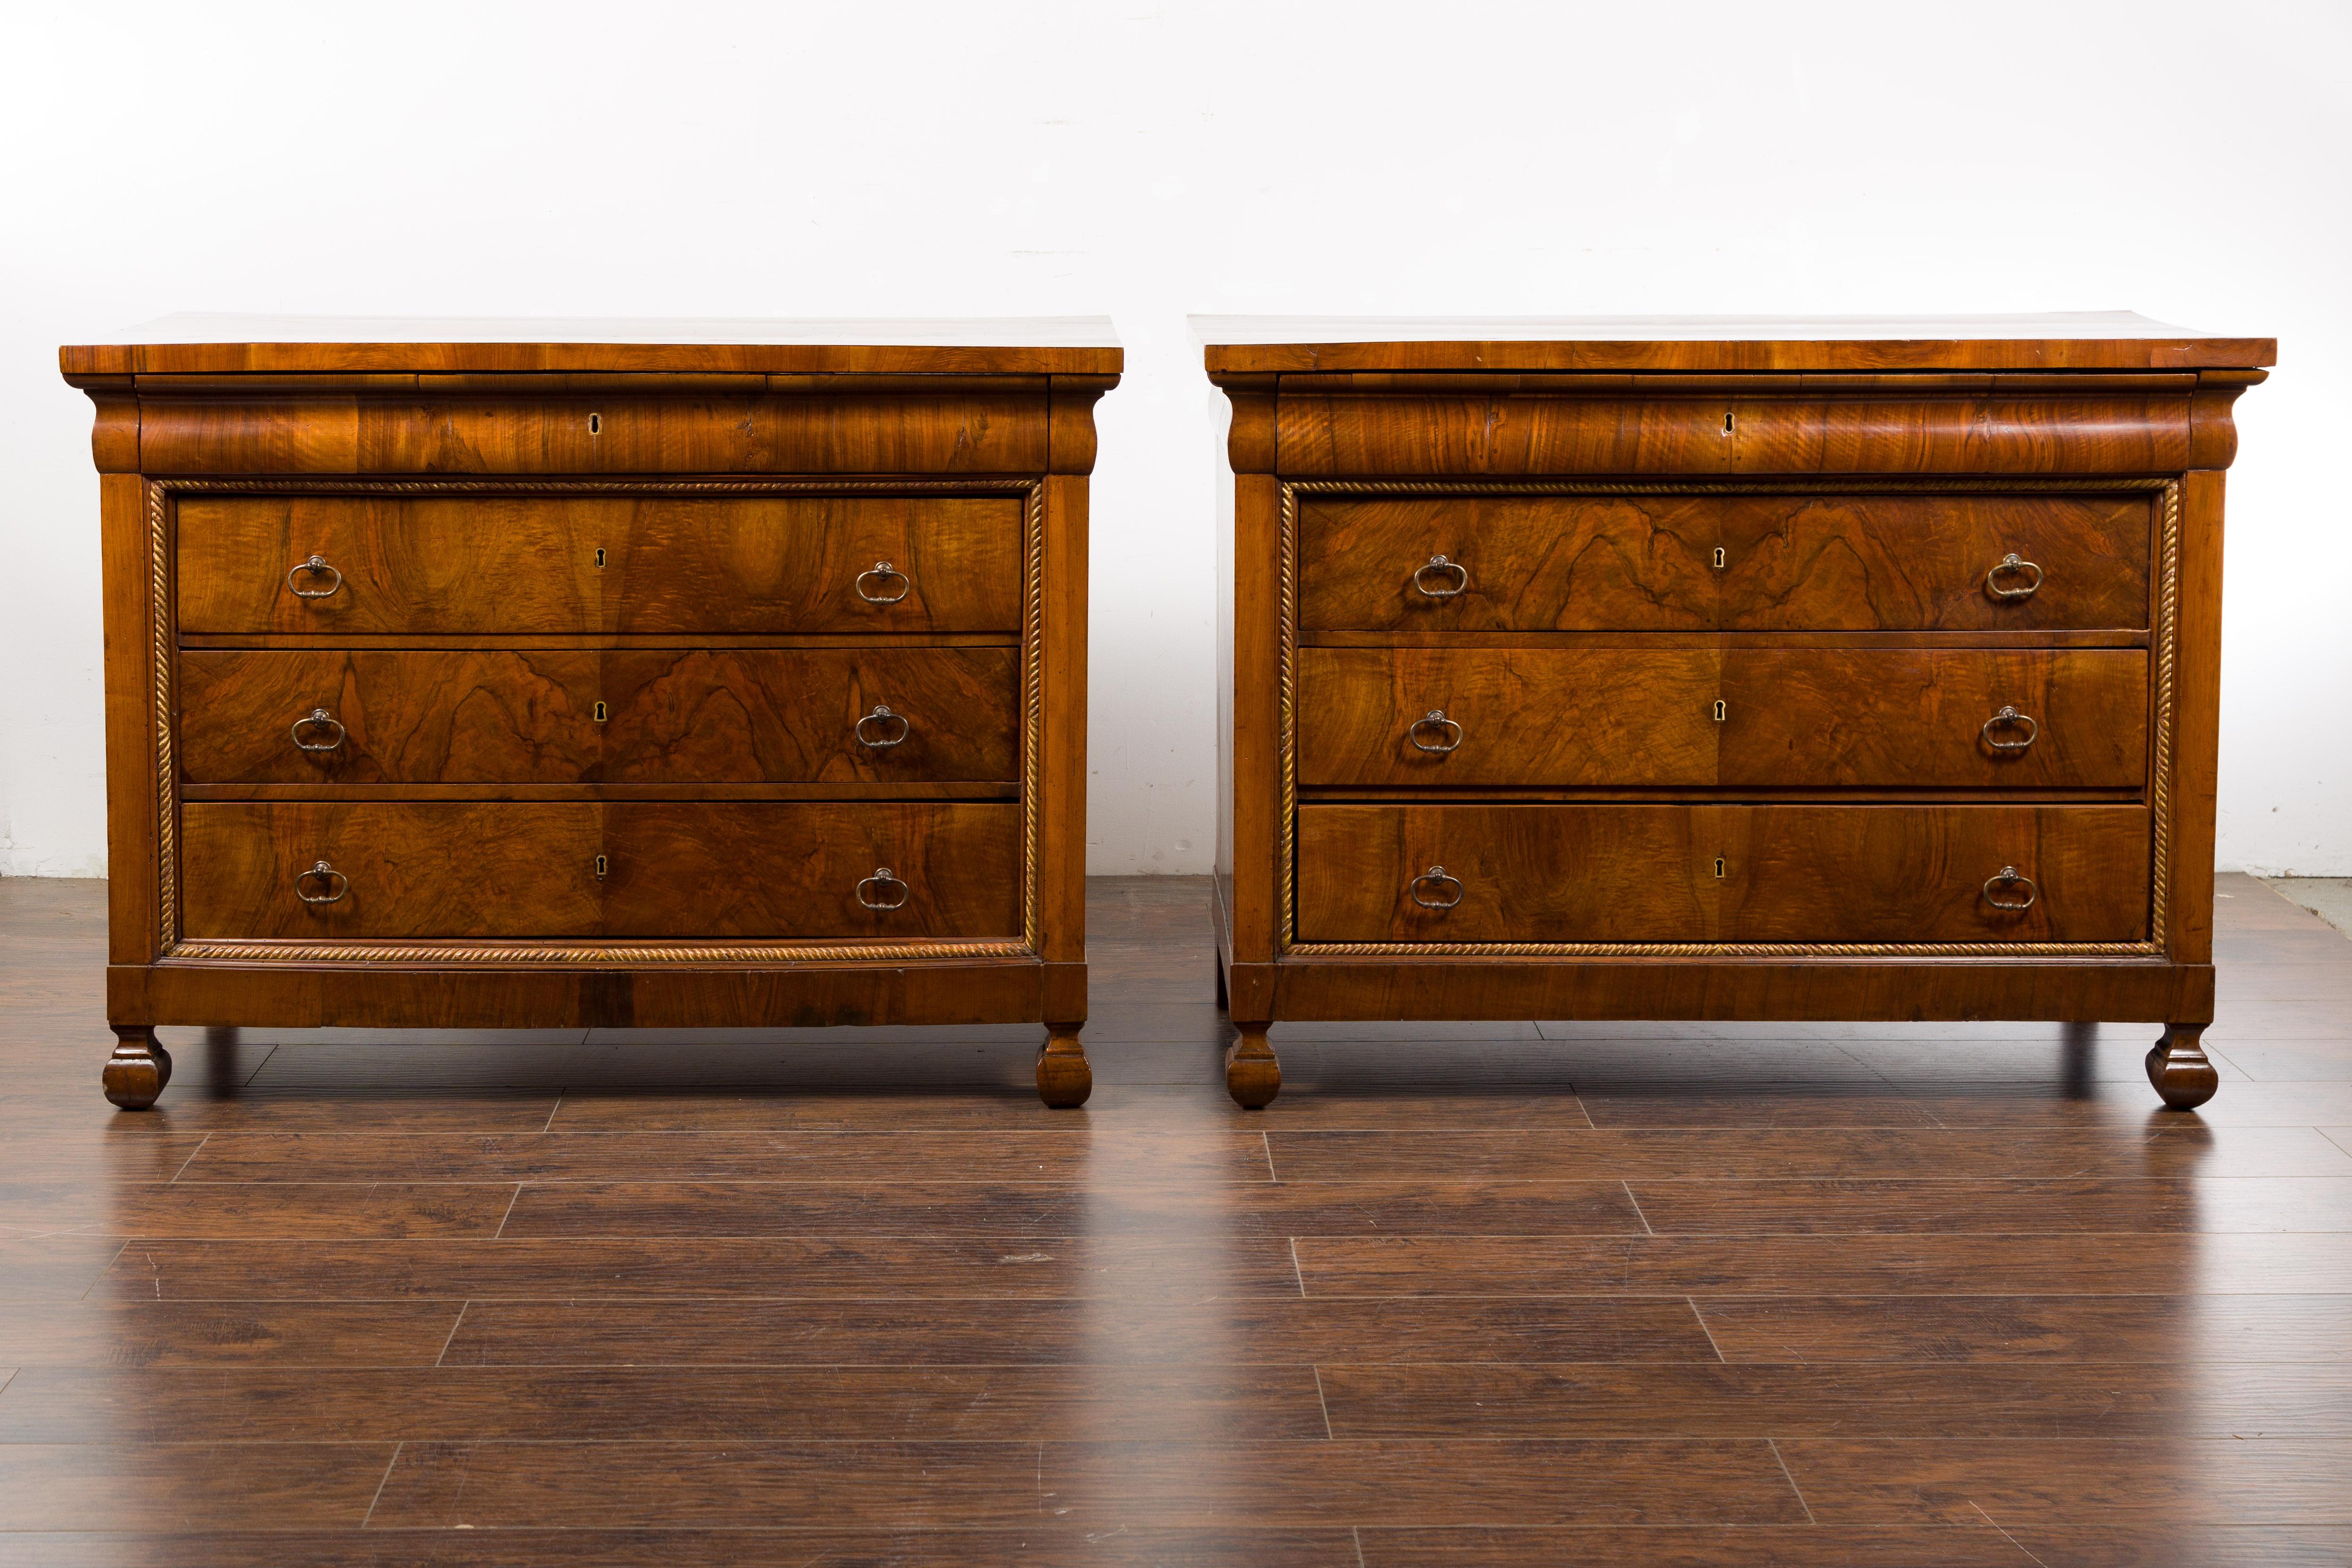 A pair of Italian 18th century walnut commodes with bookmatched veneer, four drawers and petite carved feet. Immerse yourself in the historical grandeur of this pair of Italian 18th-century walnut commodes. These captivating pieces present the